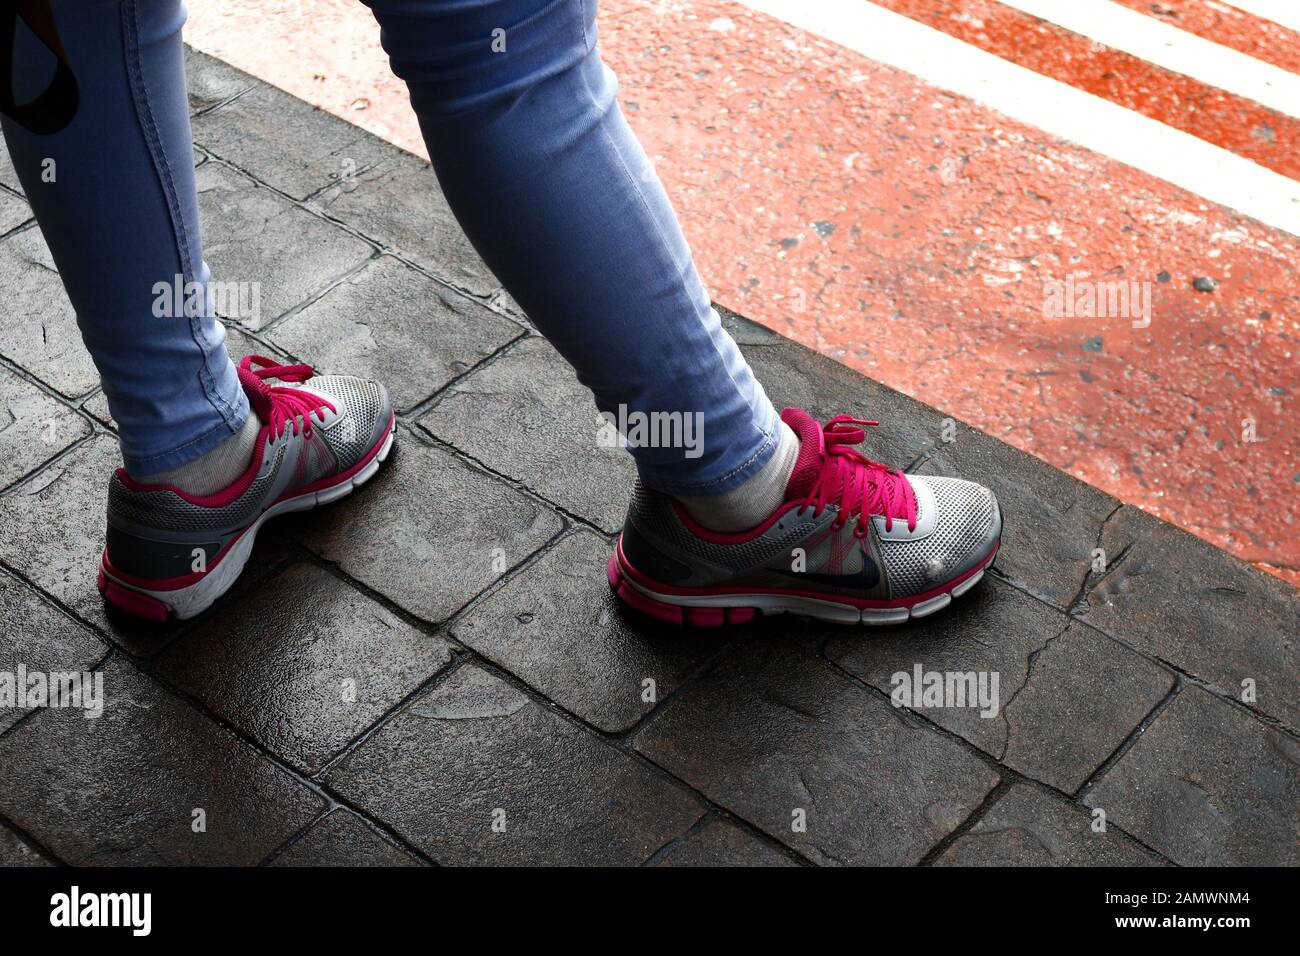 Antipolo City, Philippines - January 10, 2020: Lady wearing colorful running  shoes and skinny jeans stand on concrete floor Stock Photo - Alamy